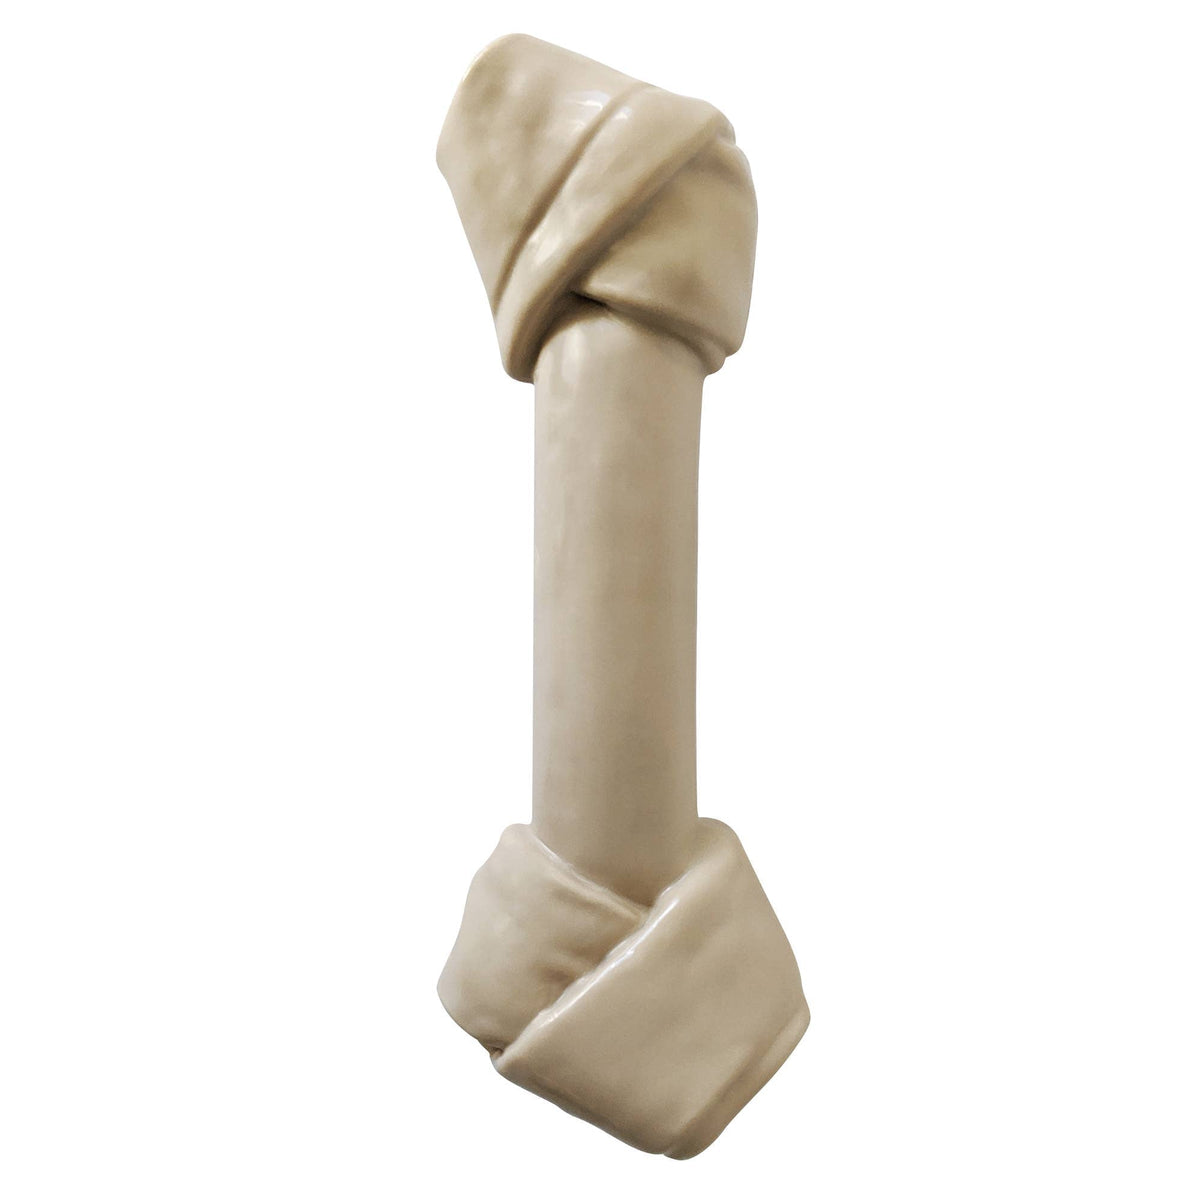 Vegan Nylon Rawhide-Shaped Chew Bone: Durable and Eco-Friendly Toy for Dogs of All Sizes by American Pet Supplies